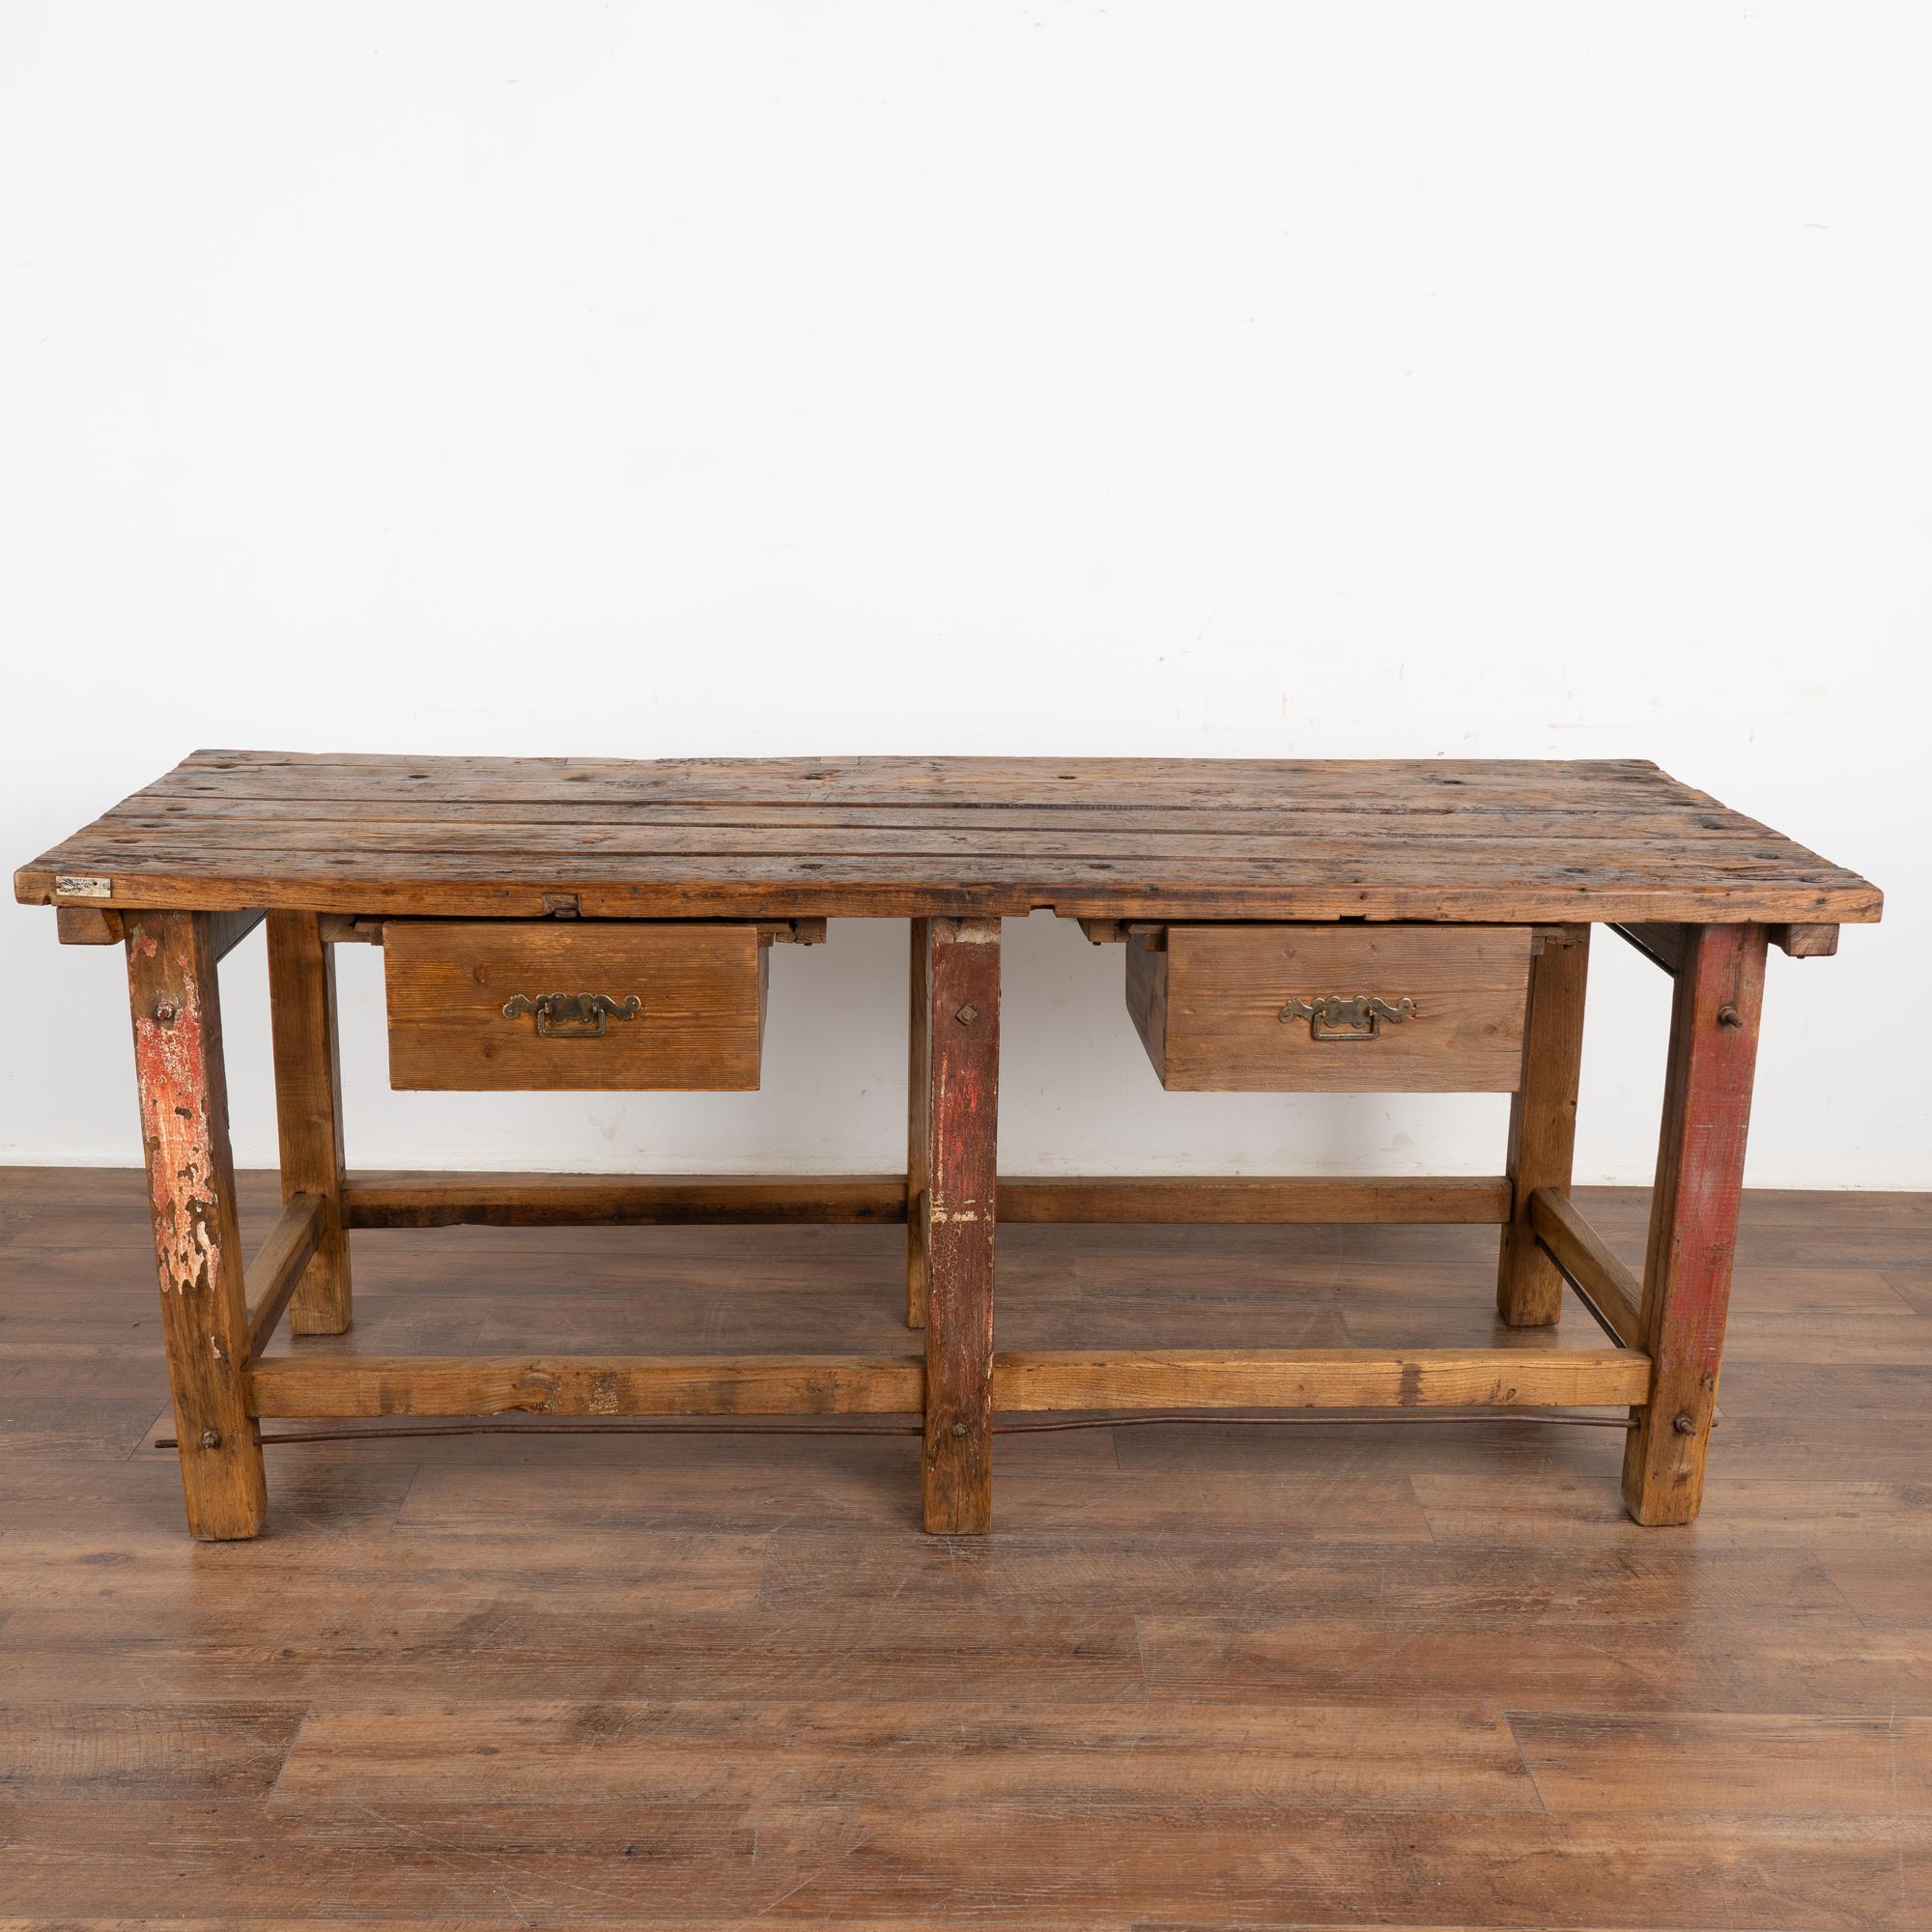 Hungarian Antique Rustic Work Table With Two Drawers from Hungary circa 1880 For Sale